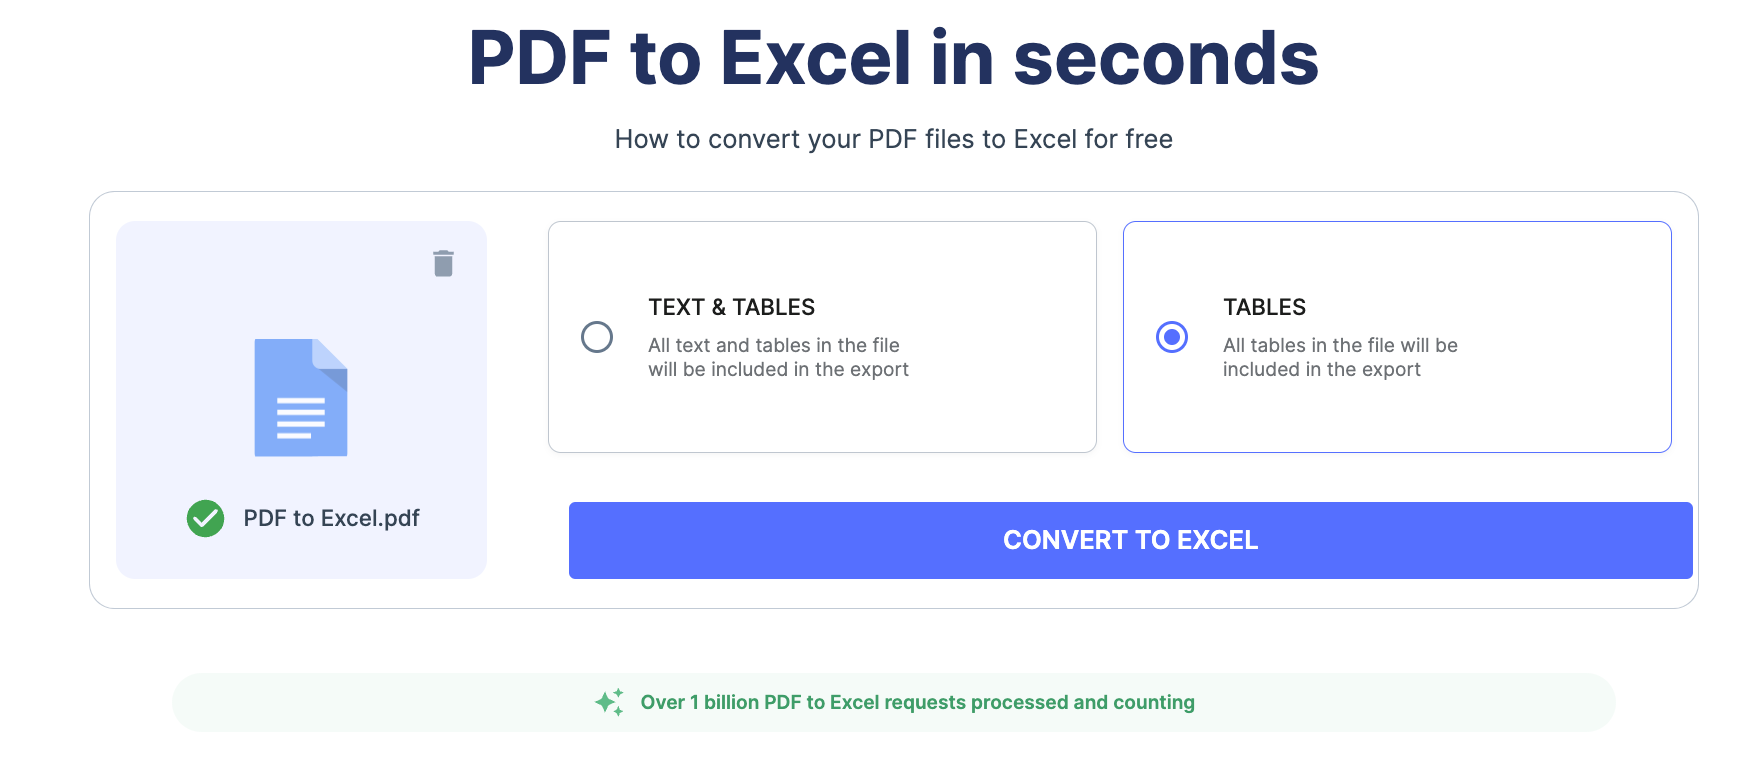 Upload file to convert from PDF to Excel